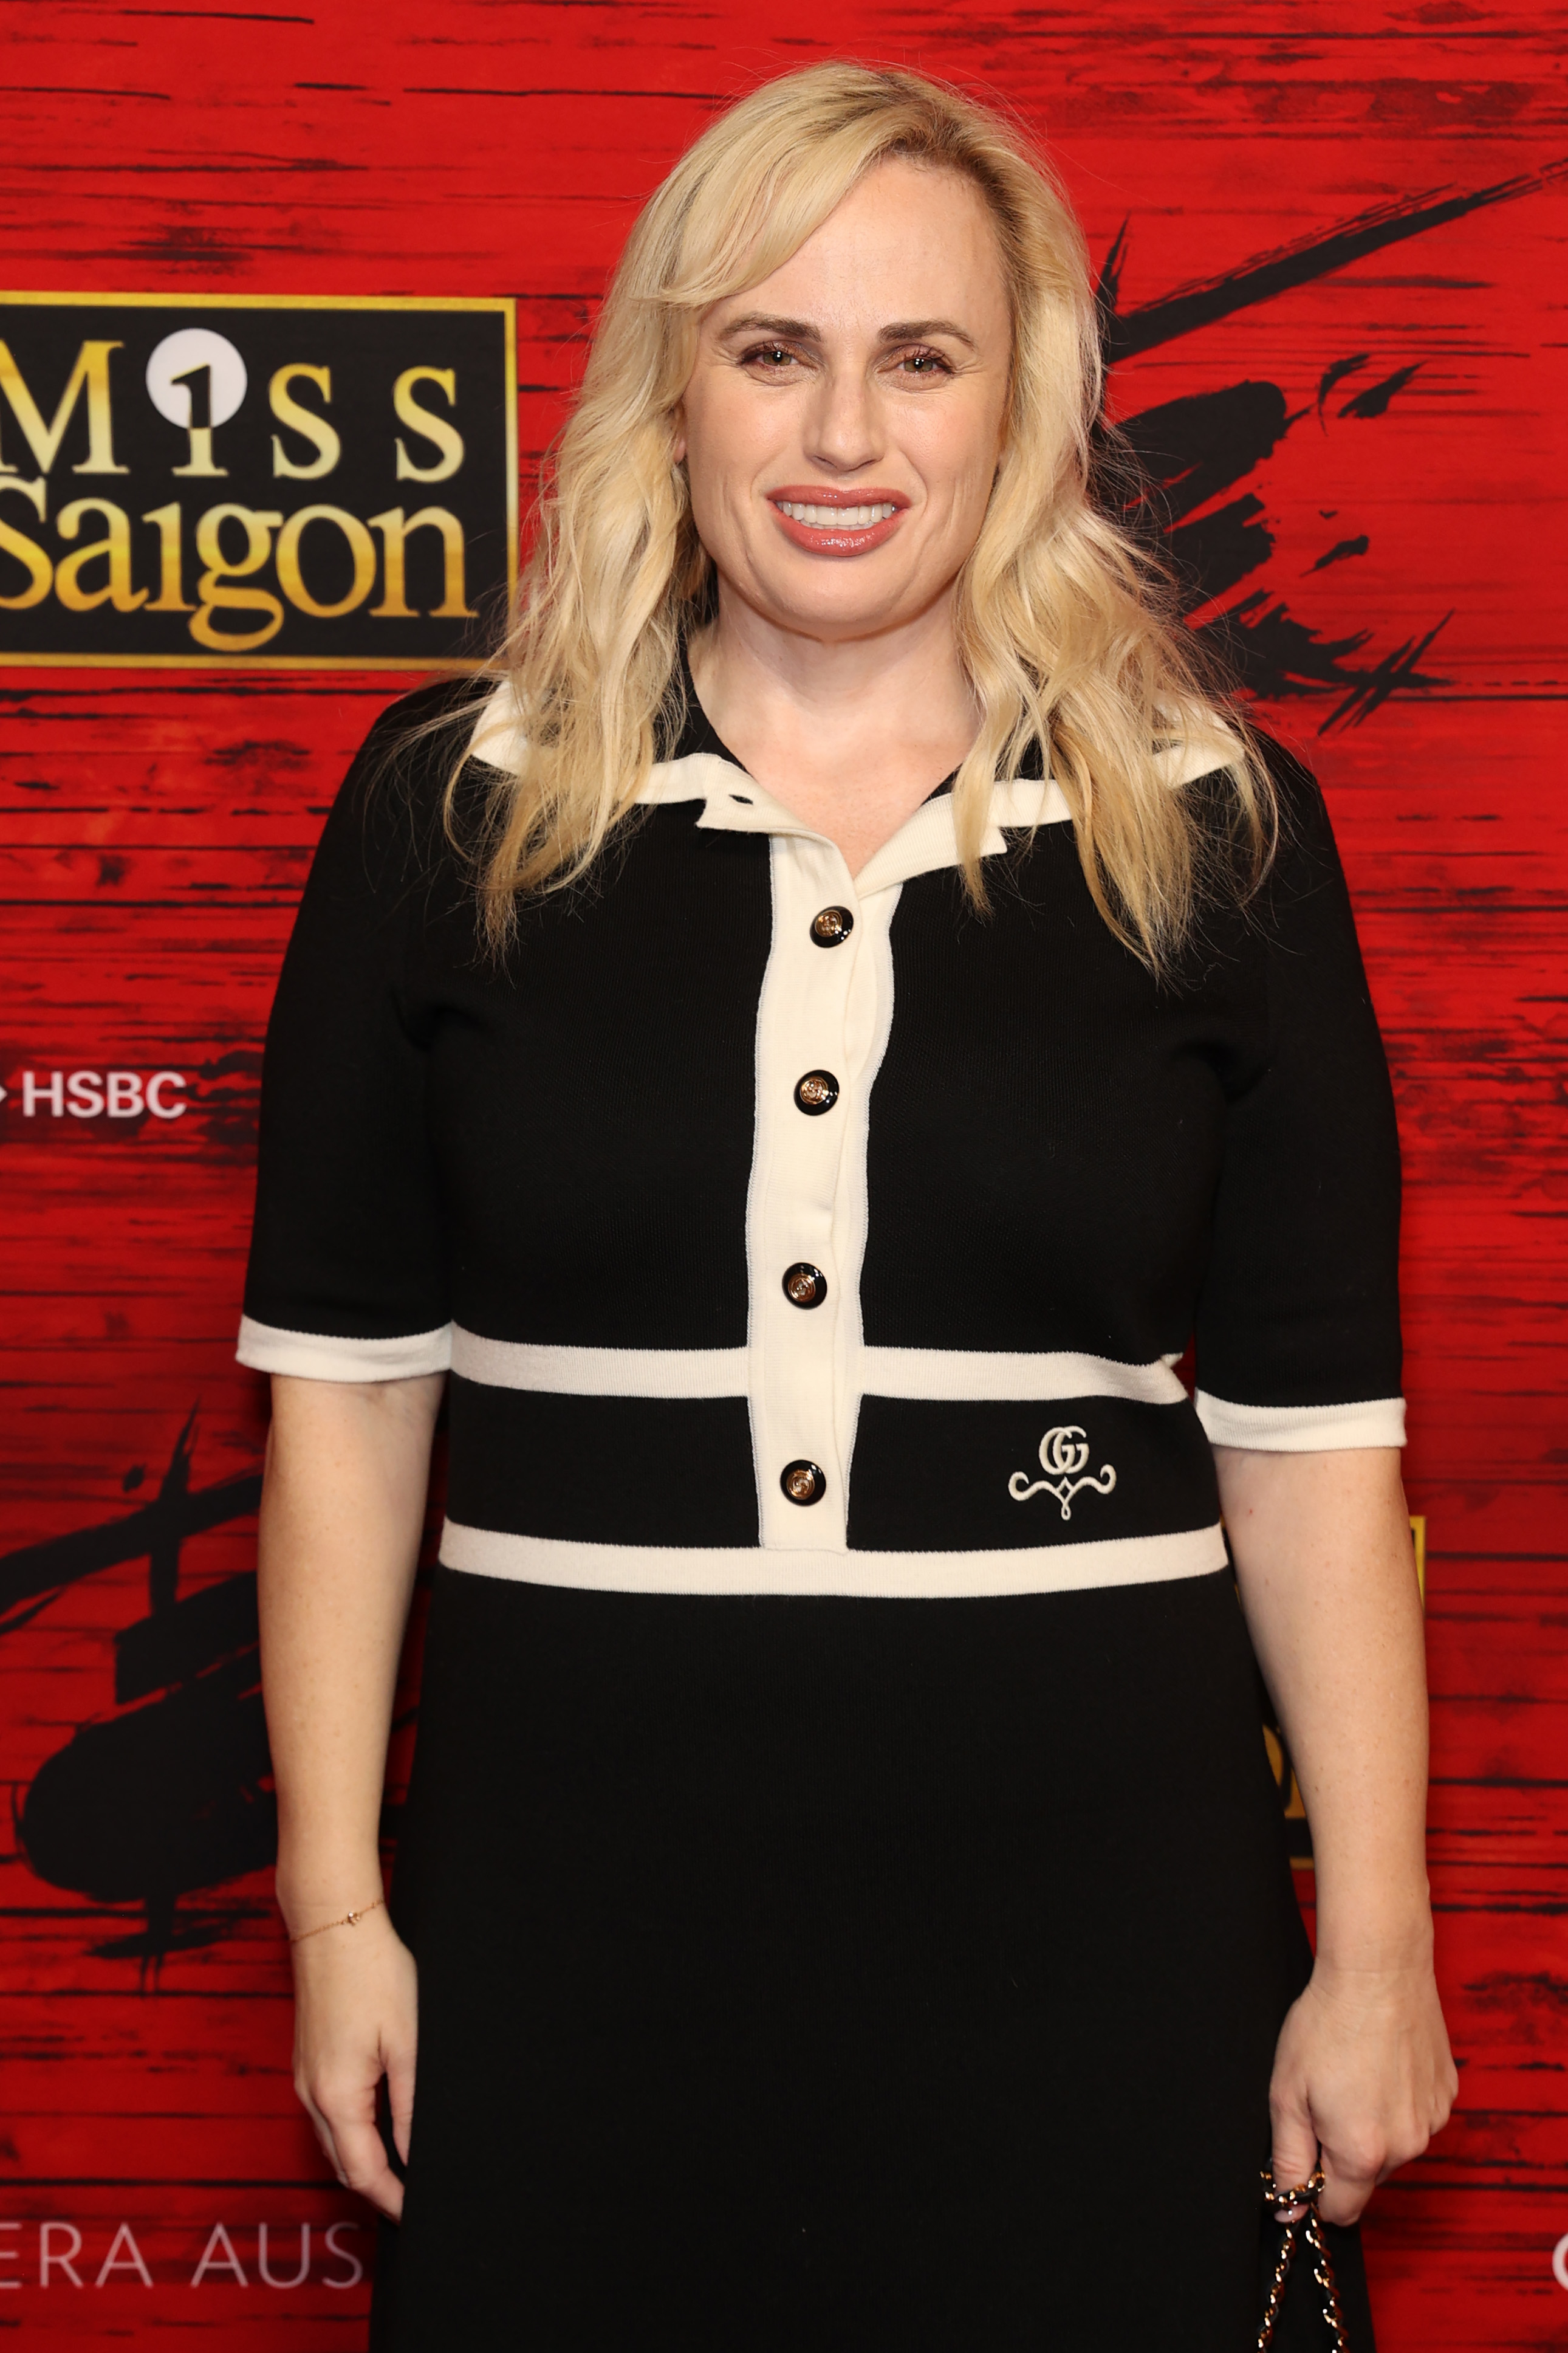 Rebel Wilson in a black dress with white trim, standing before a &#x27;Miss Saigon&#x27; backdrop